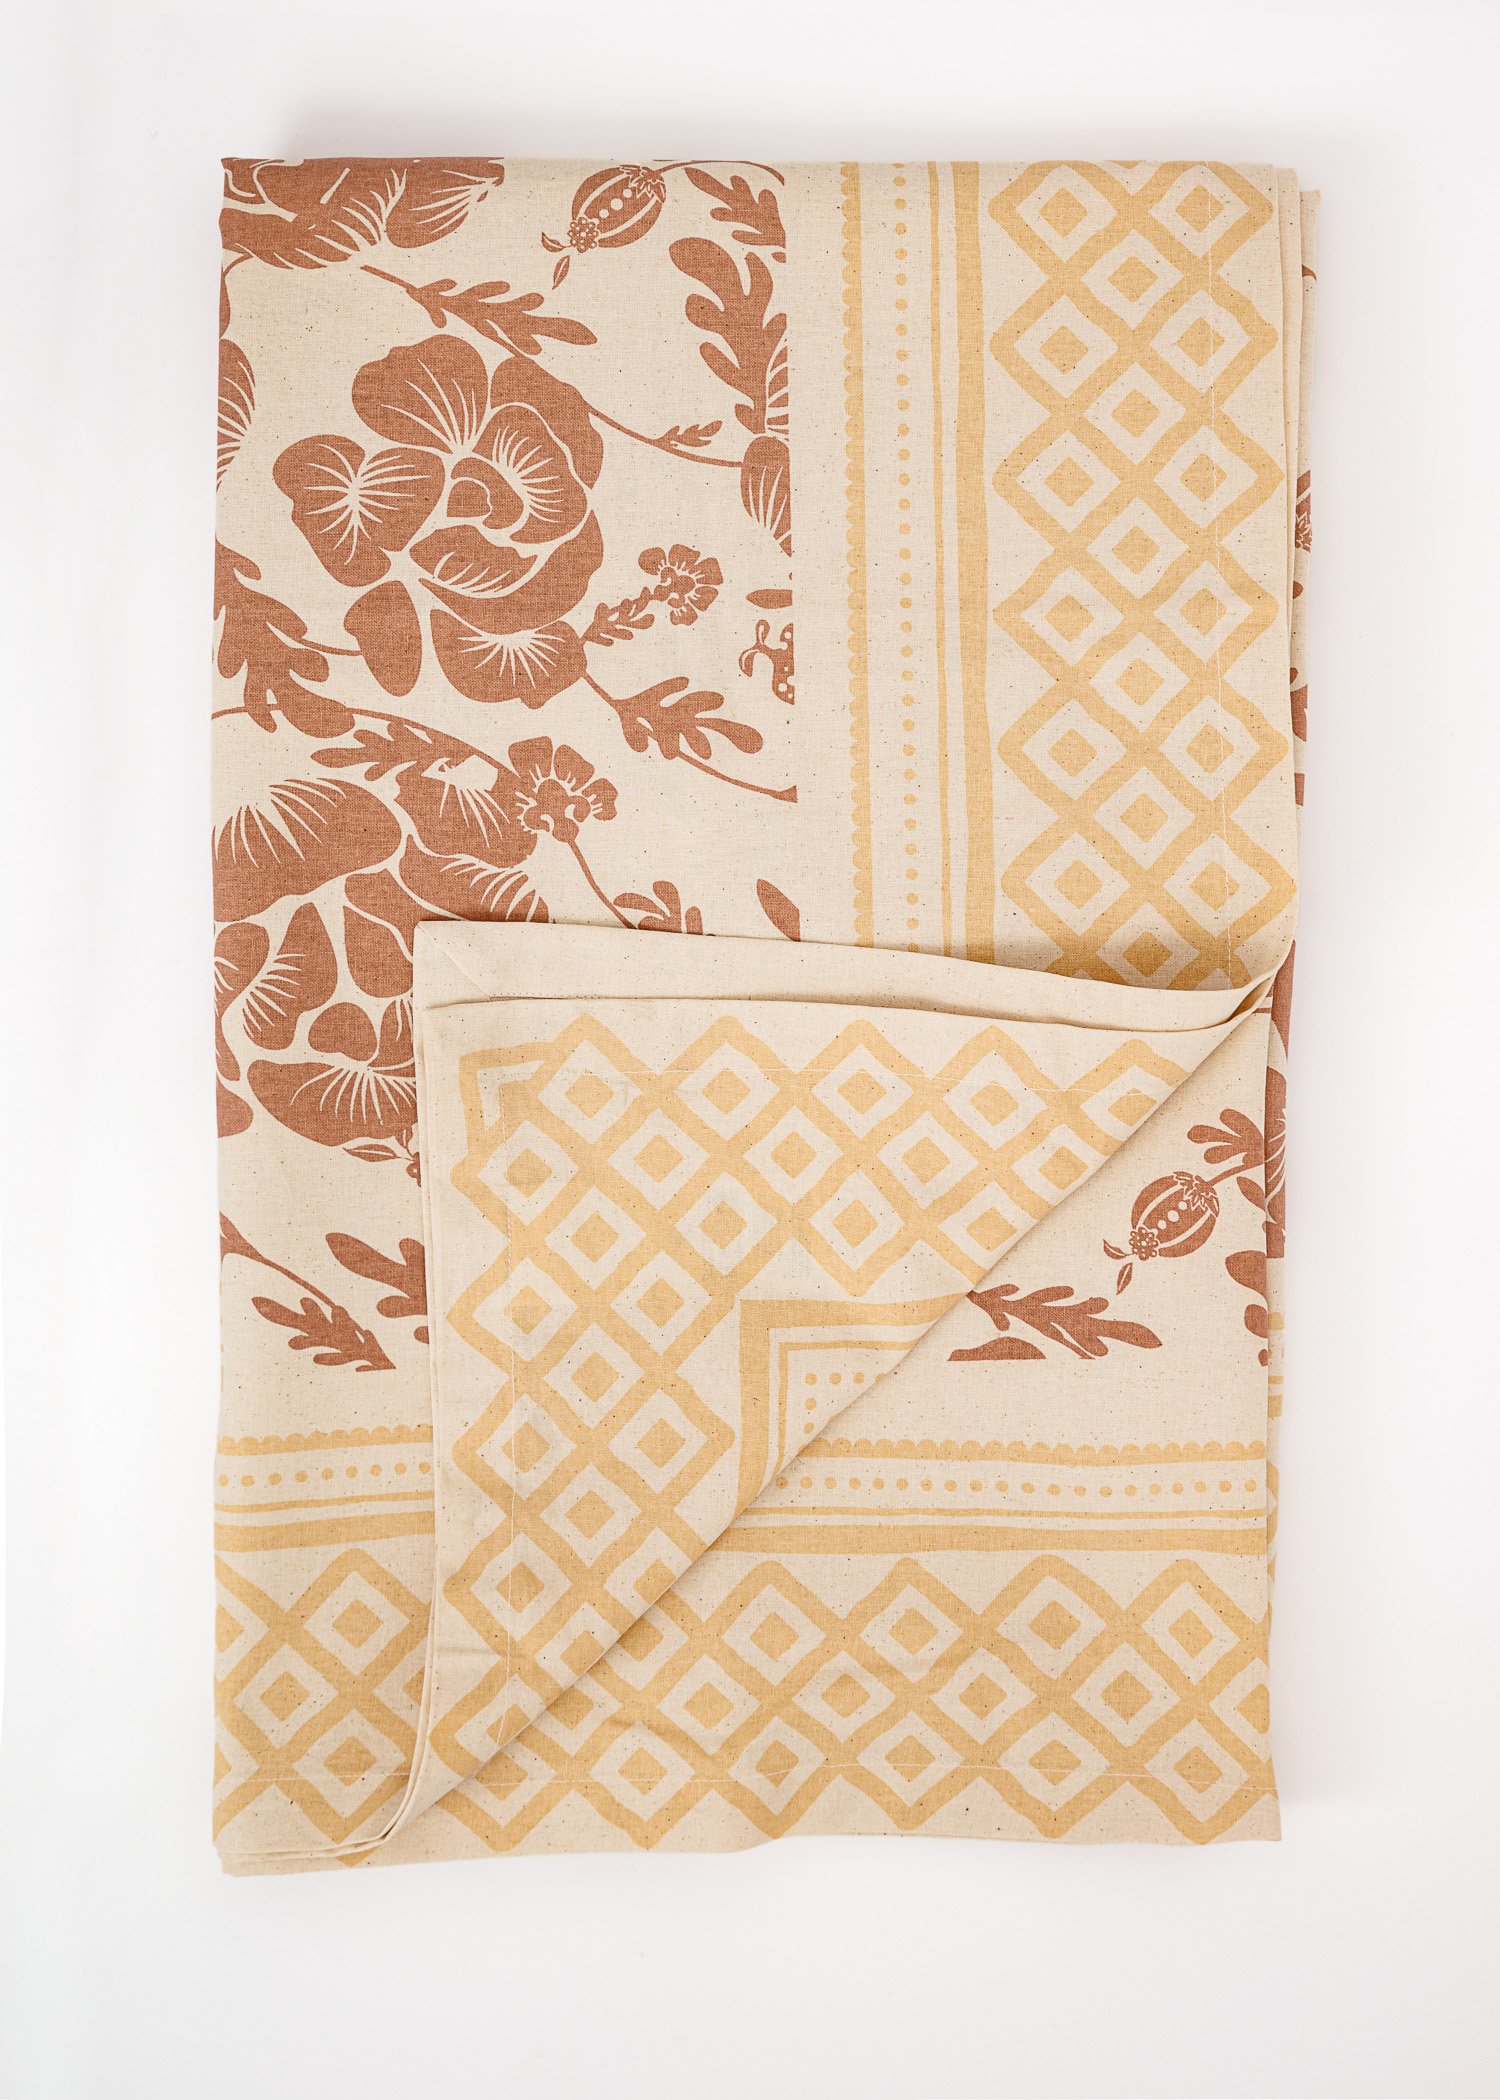 Patterned oil cloth